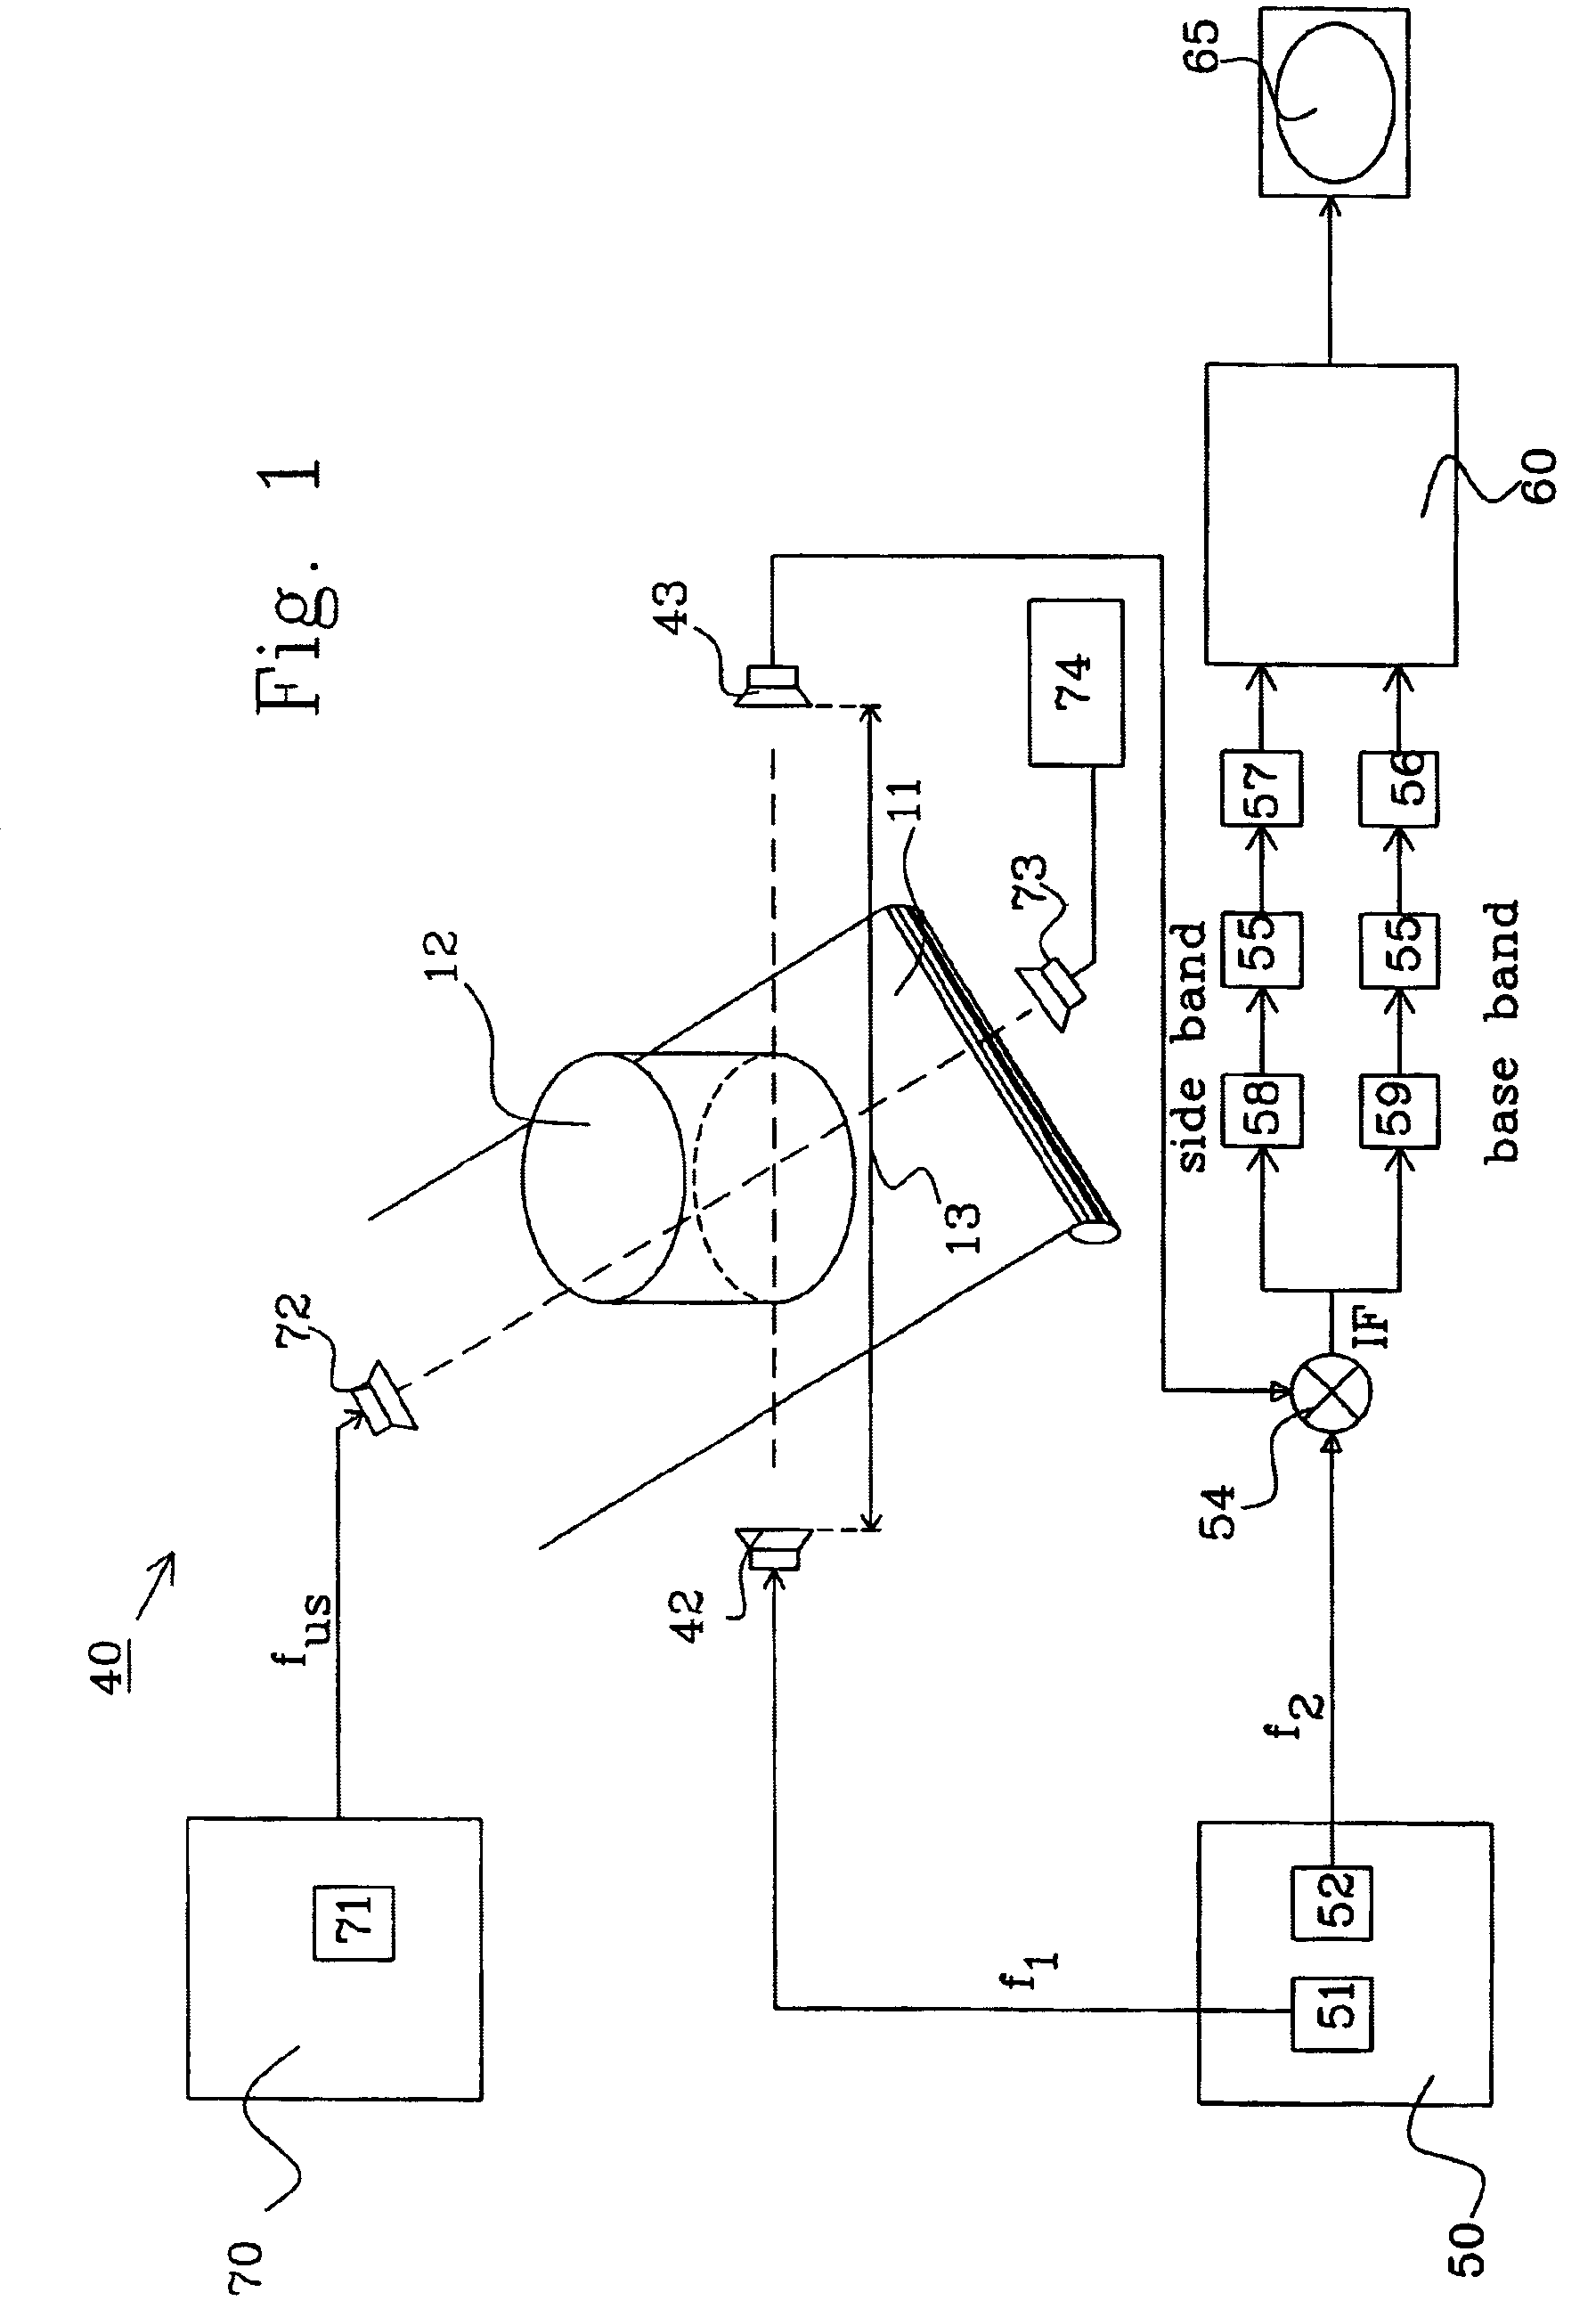 Apparatus for determining physical parameters in an object using simultaneous microwave and ultrasound radiation and measurement